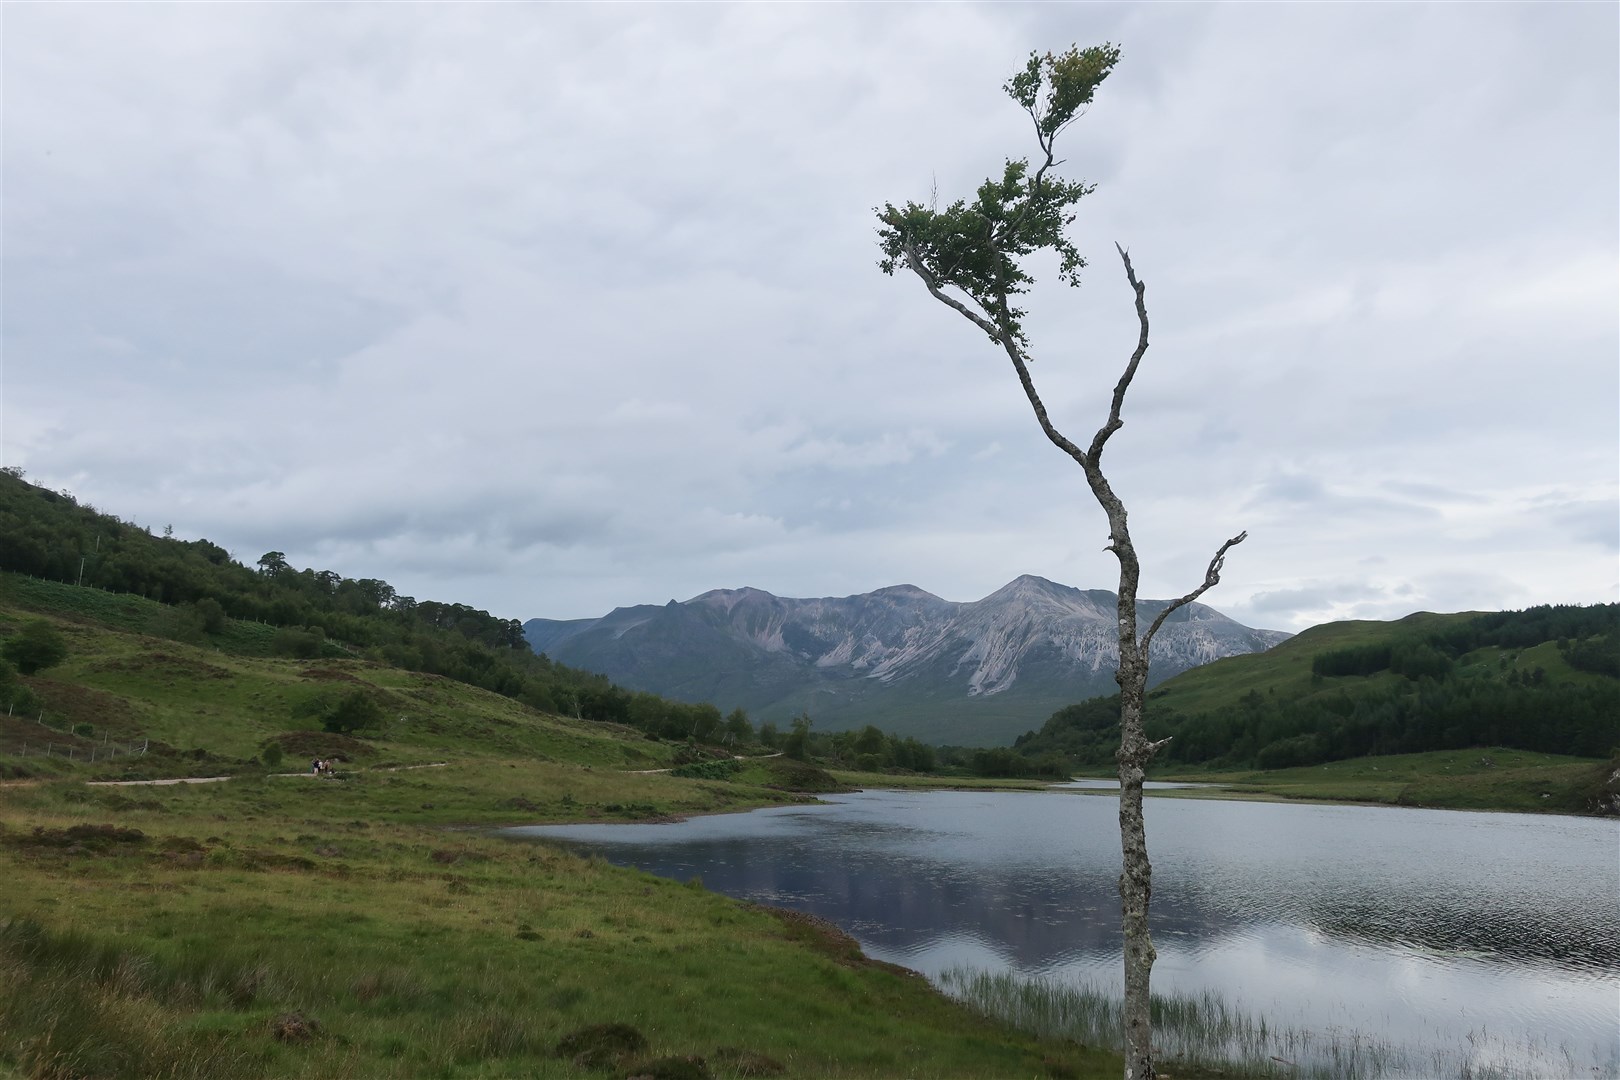 Access rangers were active across the Wester Ross area this summer.